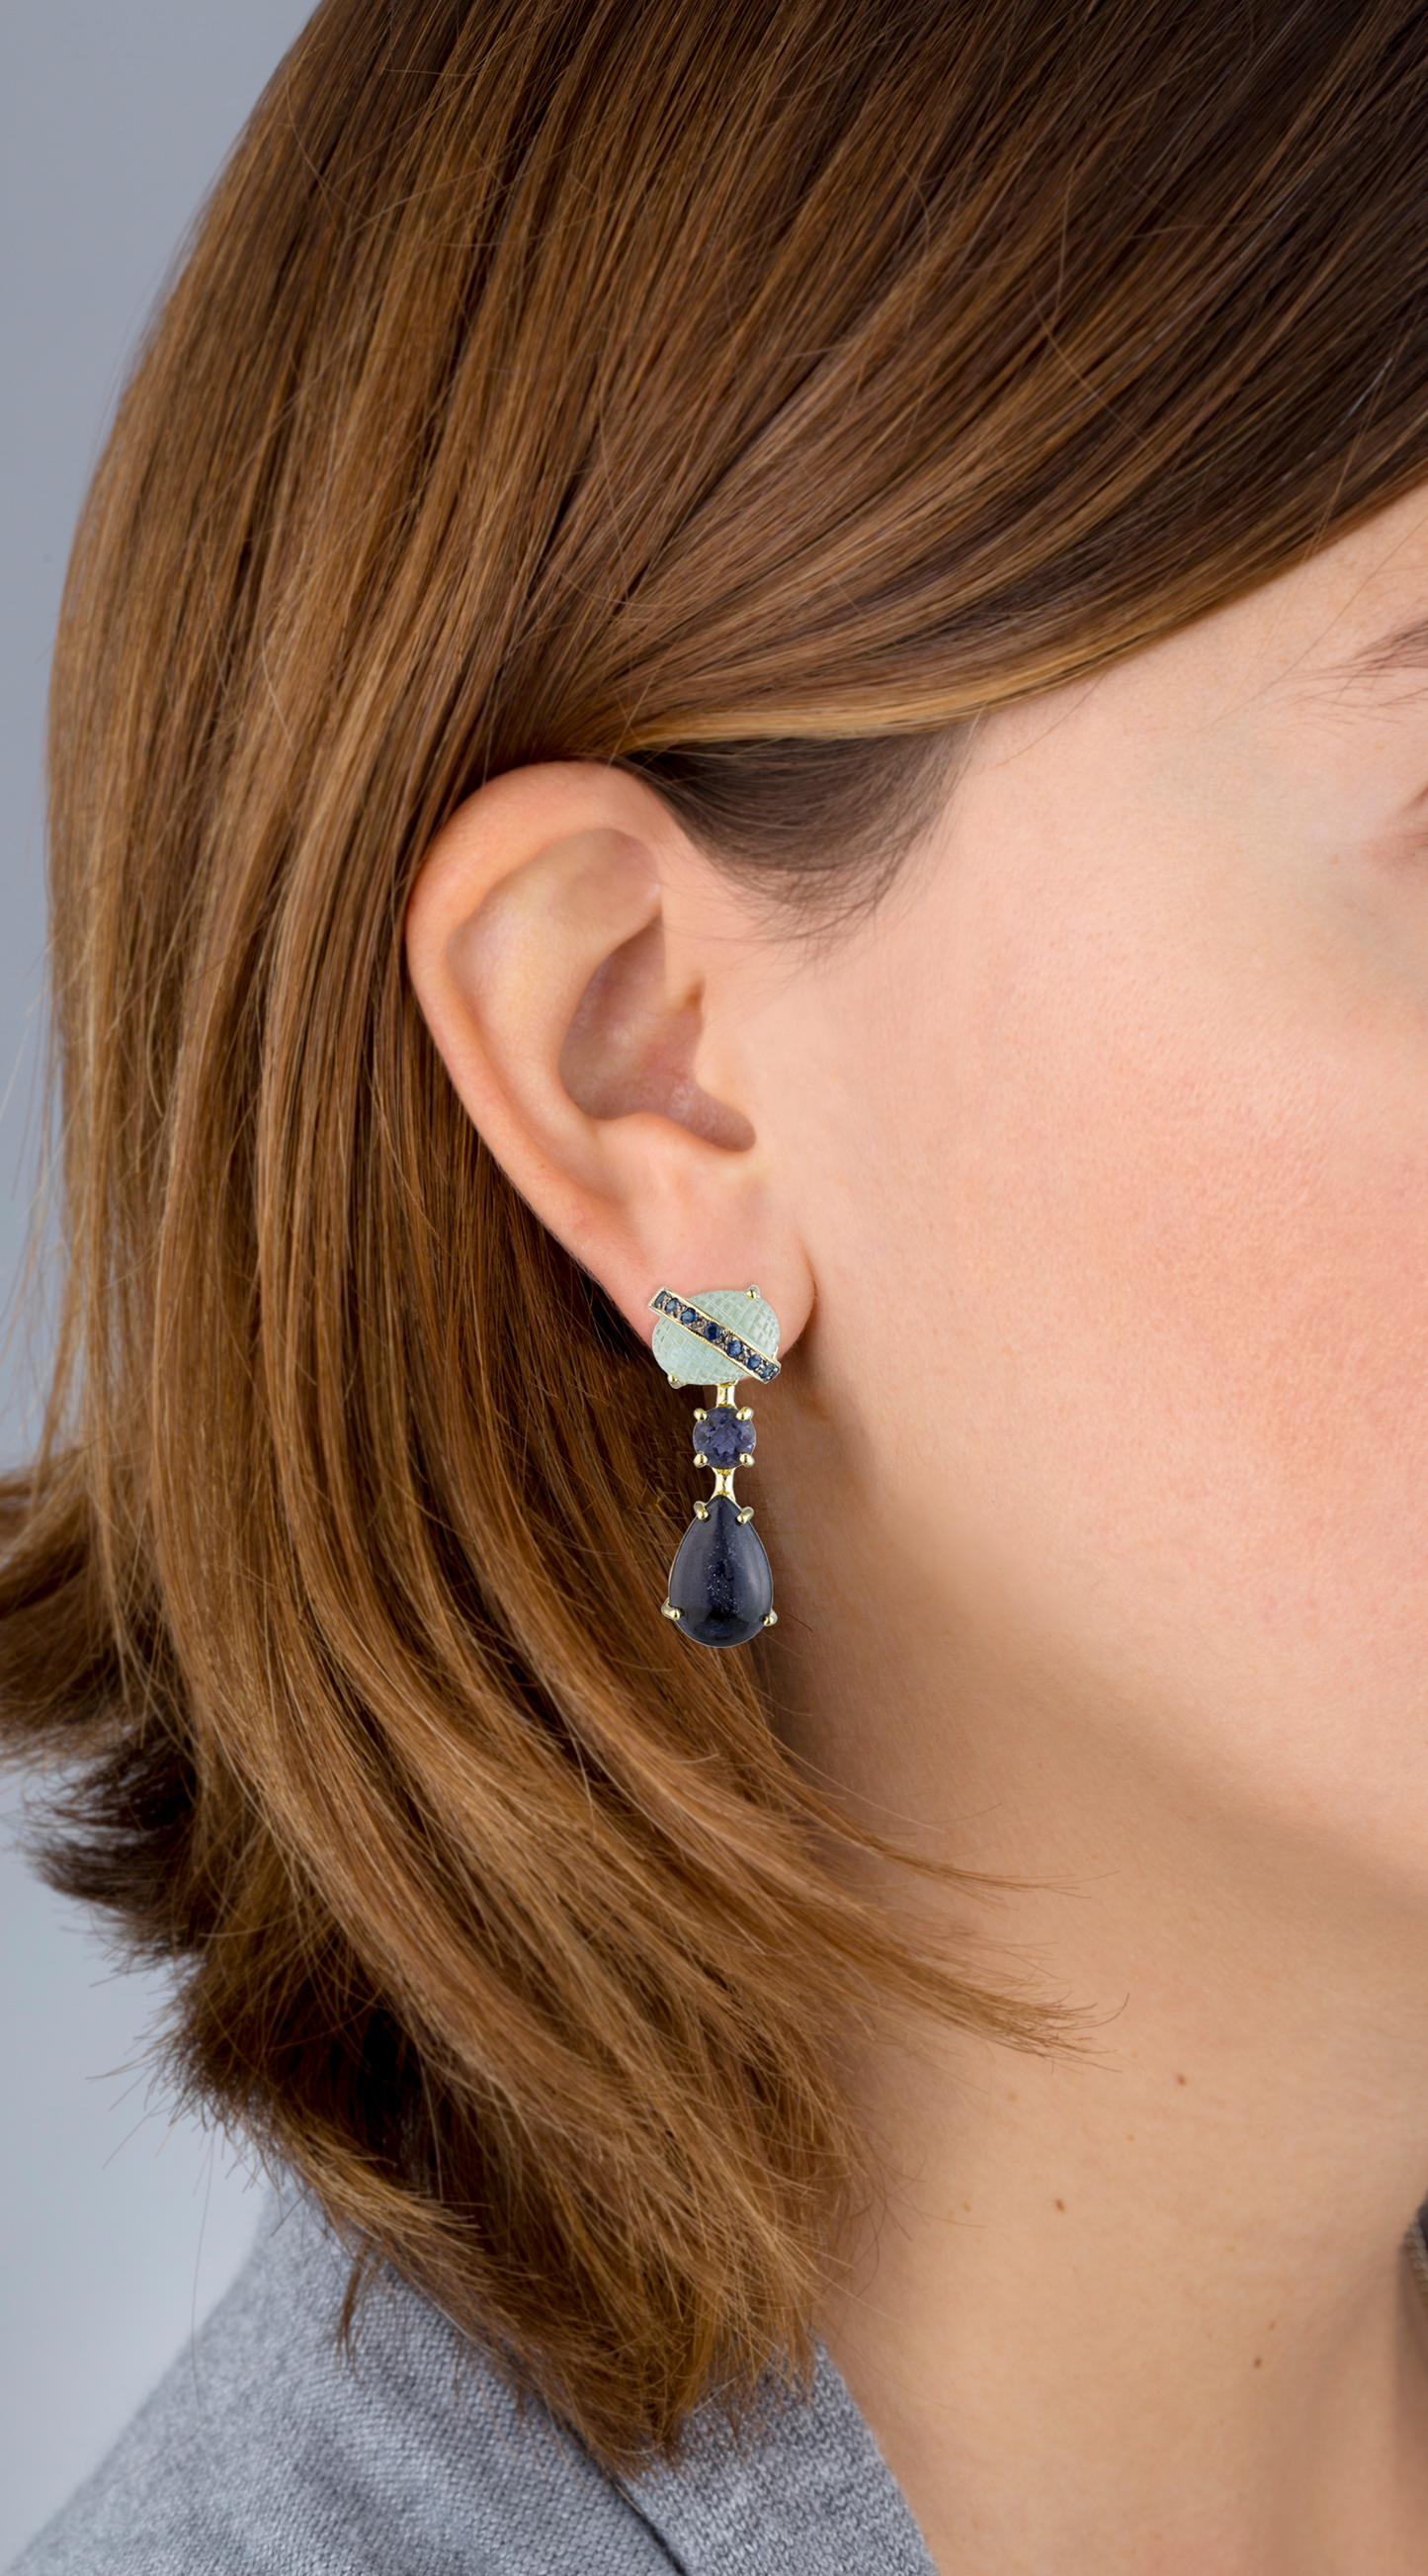 New Cab 925 Silver Earrings with Sapphire, Aquamarine  and Iolite